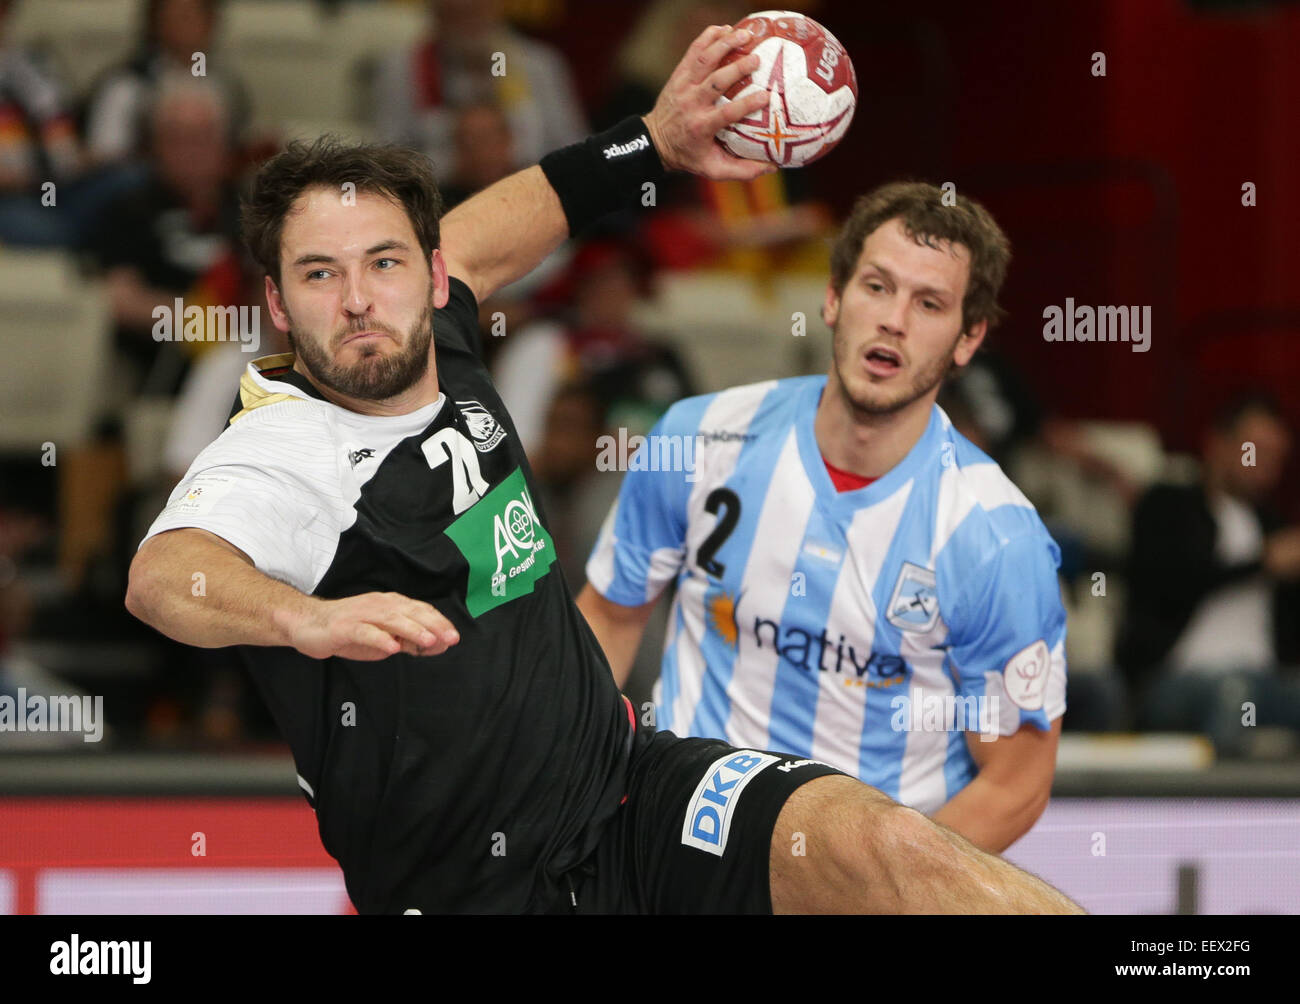 Germany's Michael Mueller (l) throws in front of Argentina's Federico Fernandez during the the men's Handball World Championship 2015 Group D match between Germany and Argentina at the Lusail Multipurpose Hall in Lusail outside Doha, Qatar, 22 January 2015. Photo: Axel Heimken/dpa Stock Photo